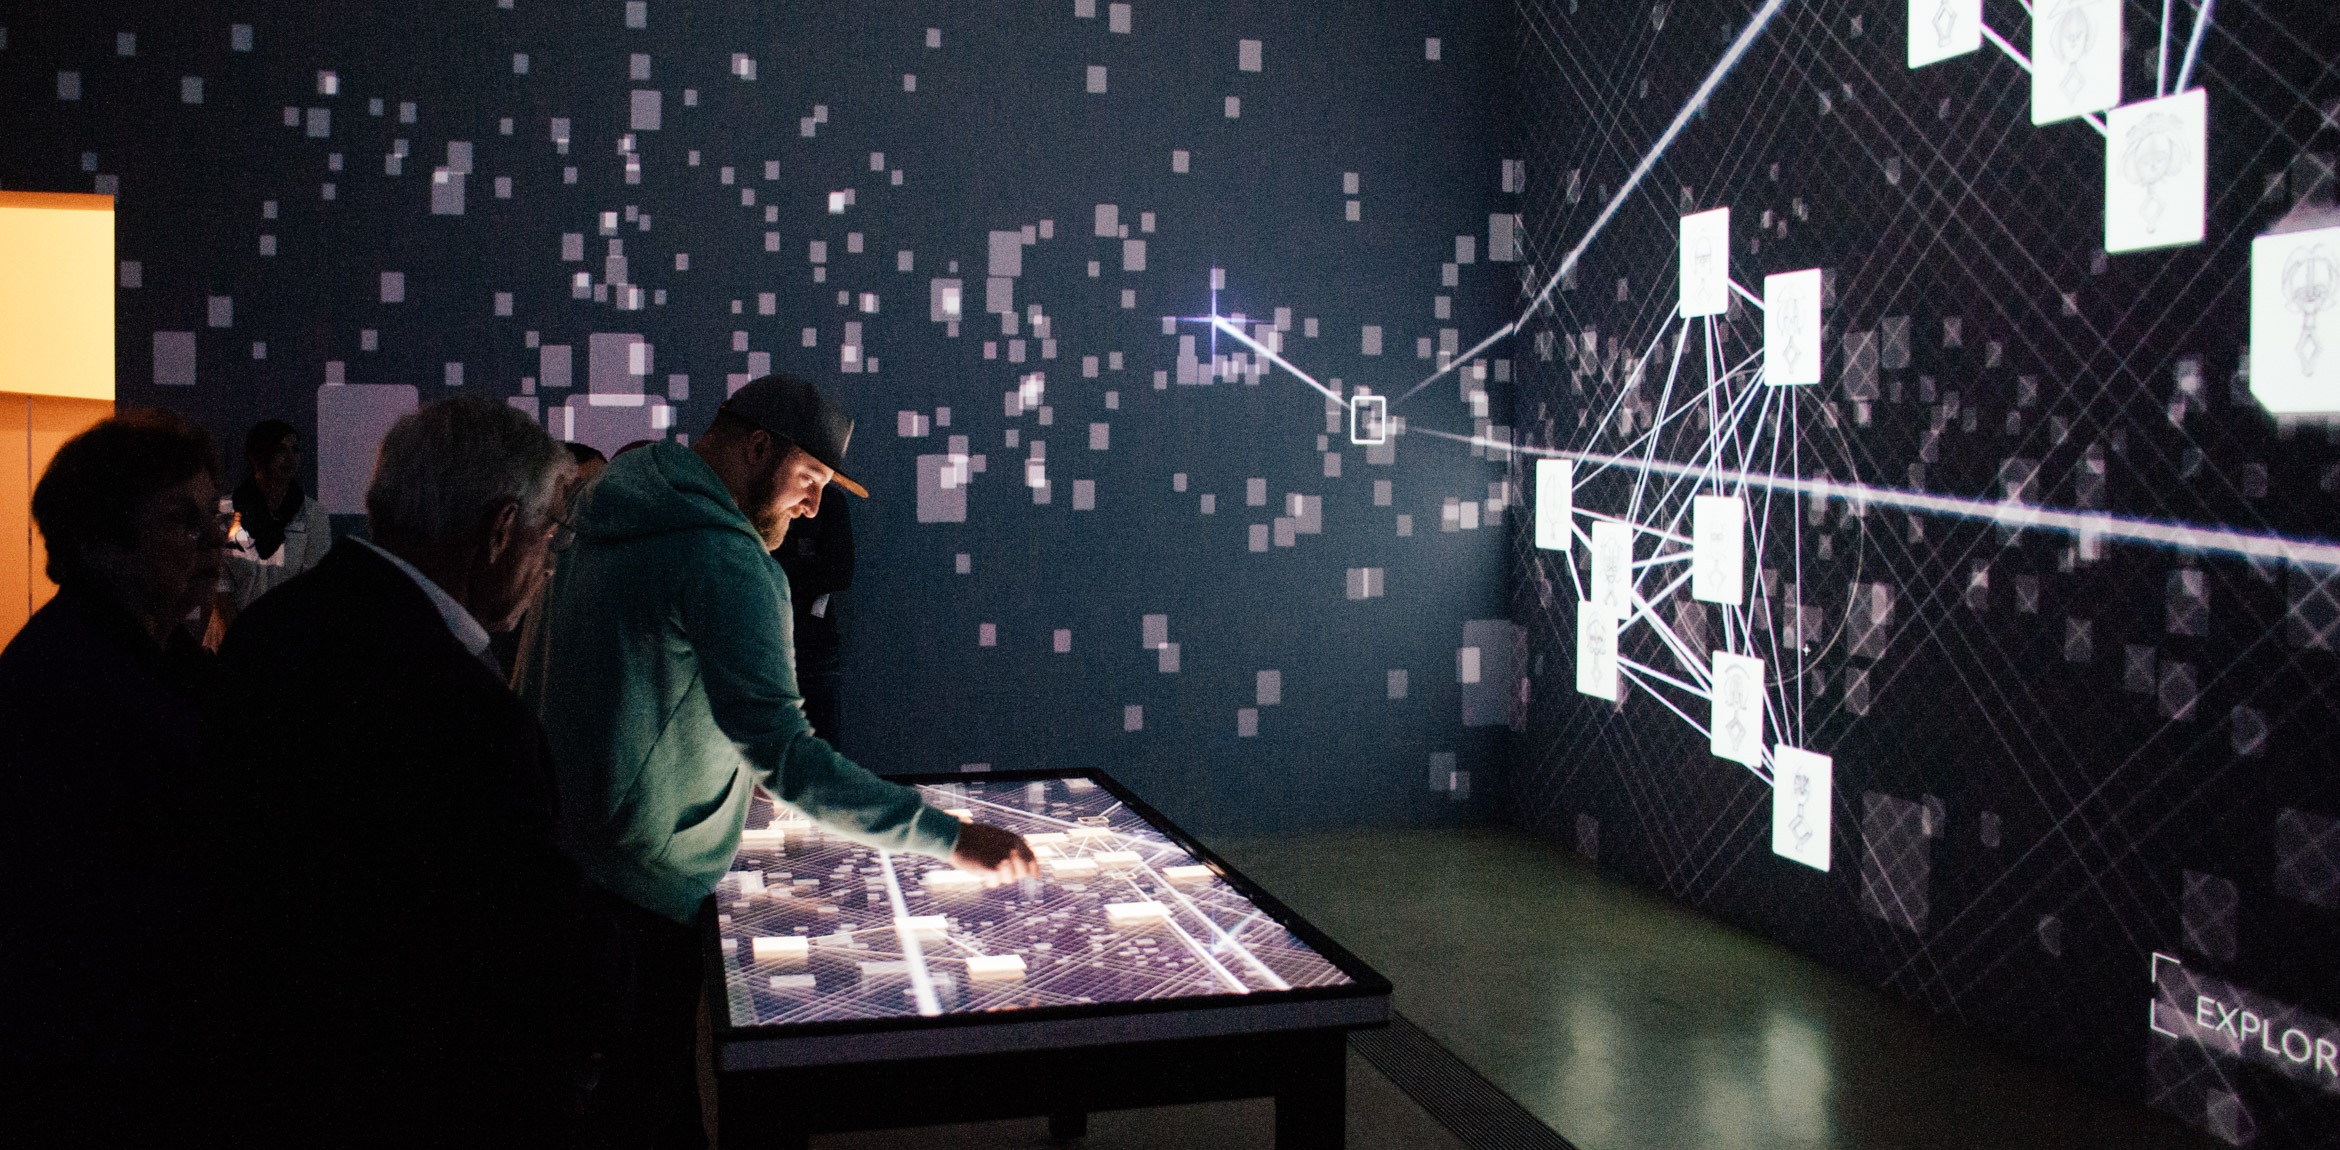 Visitors interact with Rampant Interactive's project, the Kota Data Cloud, a touchscreen table with corresponding projections on the walls of the Cube Gallery.